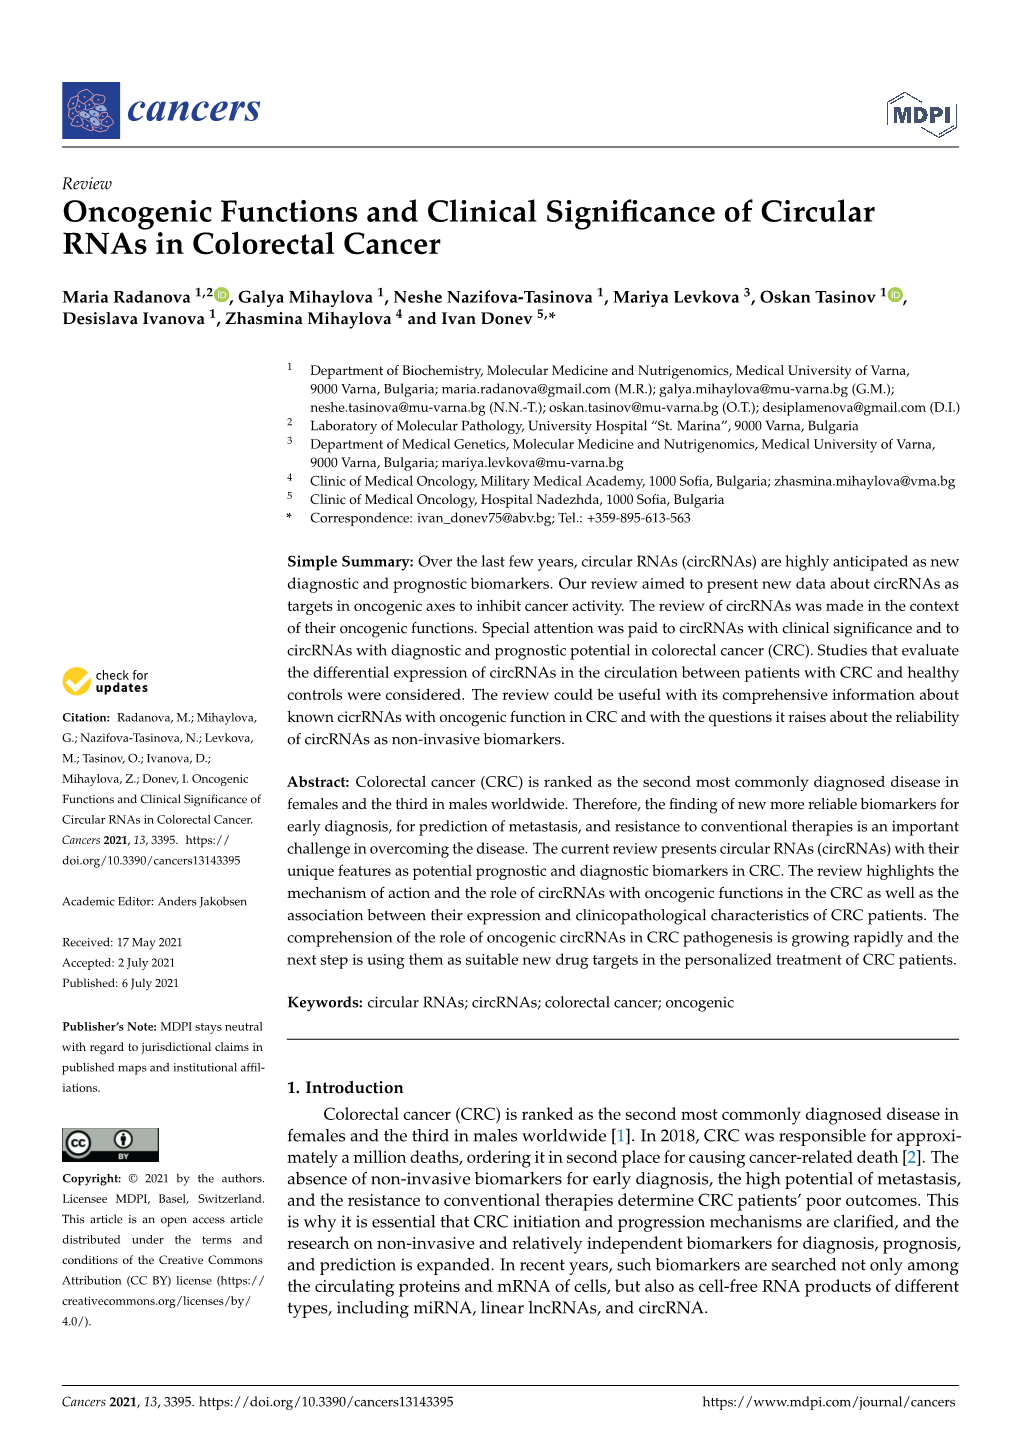 Oncogenic Functions and Clinical Significance of Circular Rnas in Colorectal Cancer